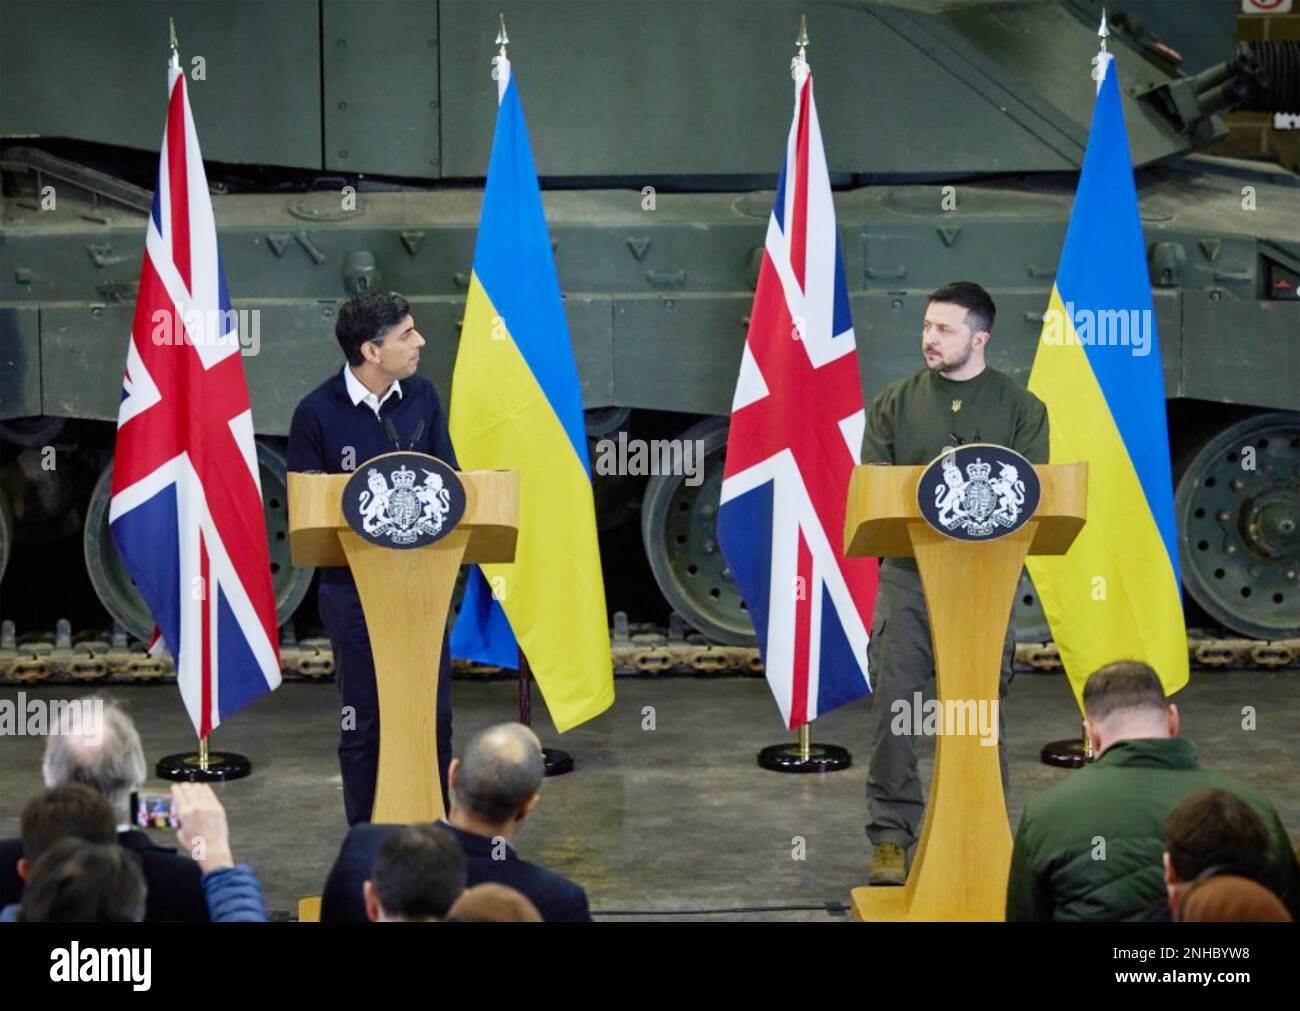 VOLODYMYR  ZELENSKY President of Ukraine is welcomed to the UK by UK Prime Minister Rishi Sunak on 8 February 2023 with a Challenger tank behind them. Stock Photo